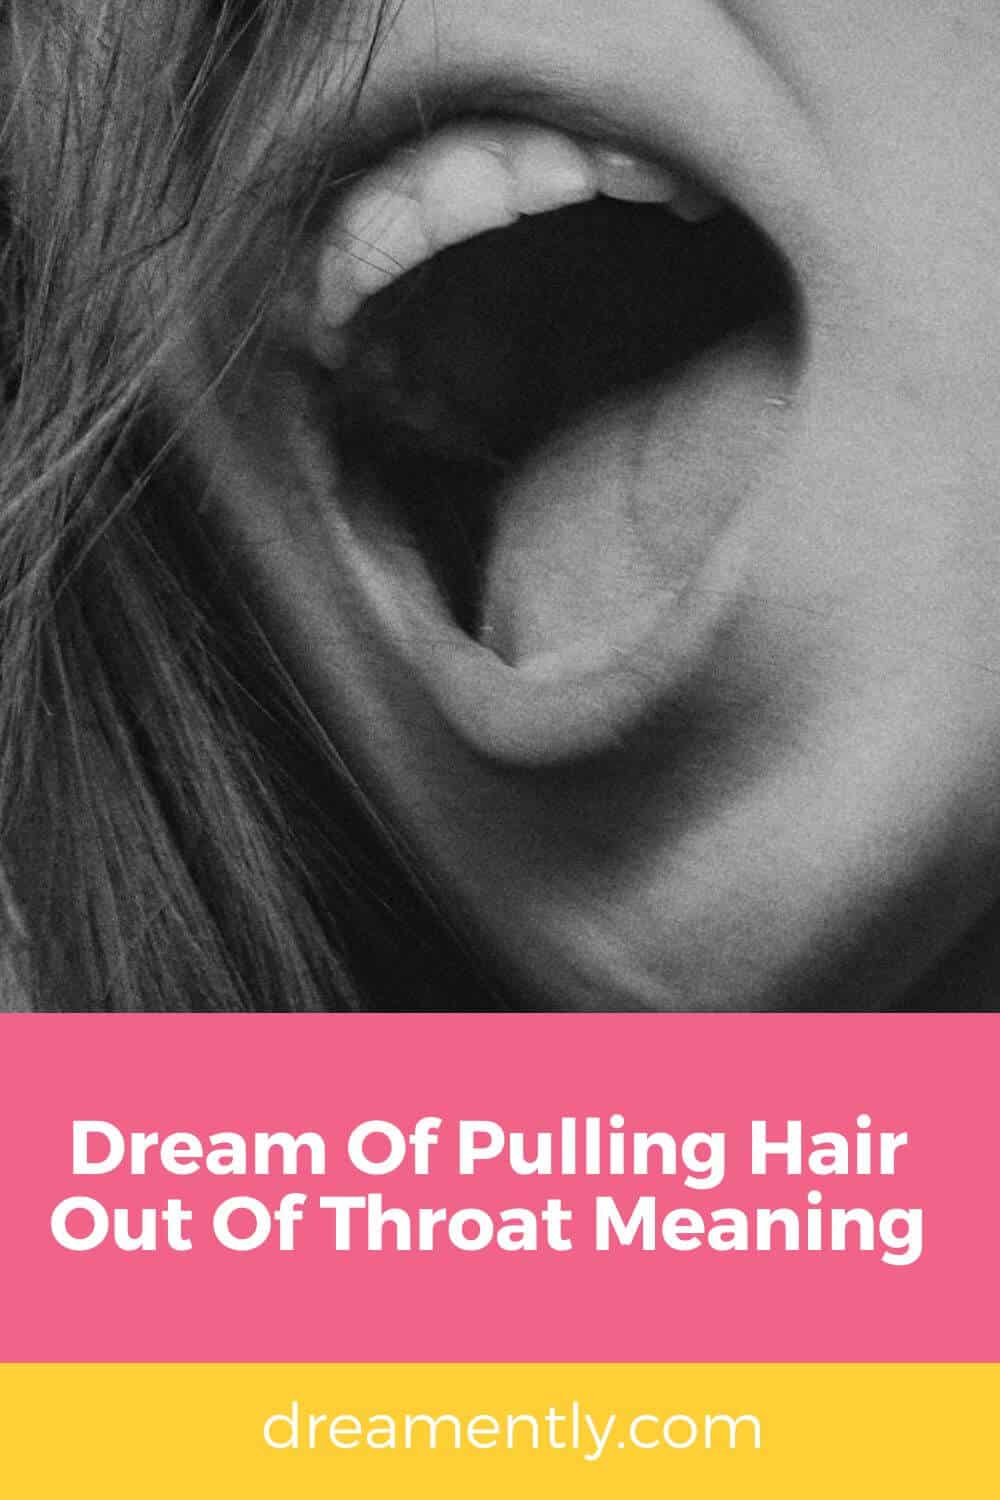 Dream Of Pulling Hair Out Of Throat Meaning